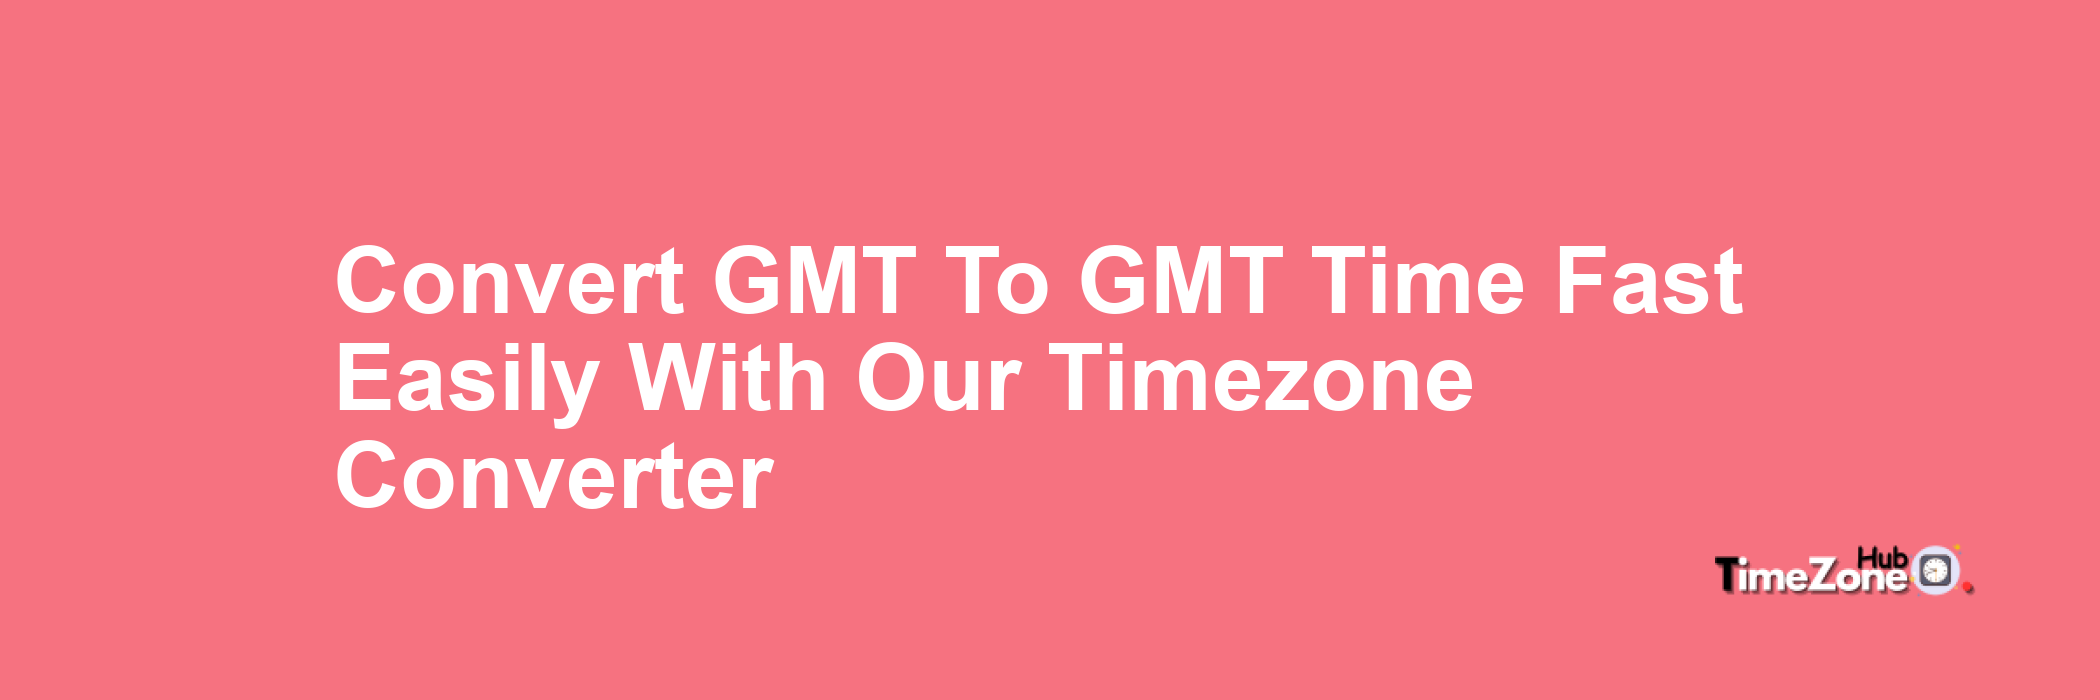 GMT to GMT